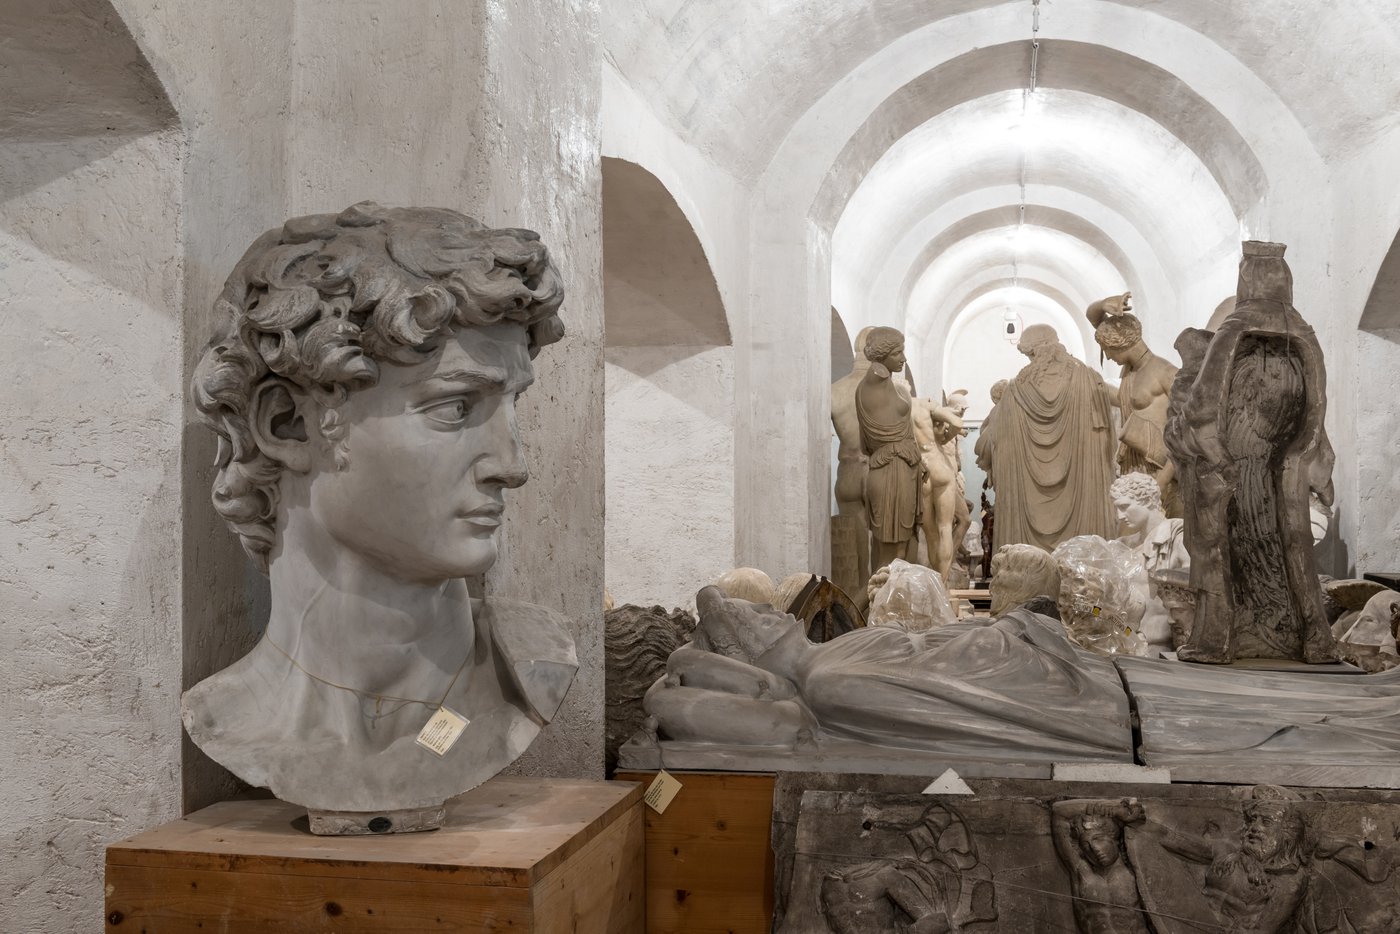 Photo of a room with vaults in which several Greek sculptures in different poses are standing close to each other. In front is the head of a young man.